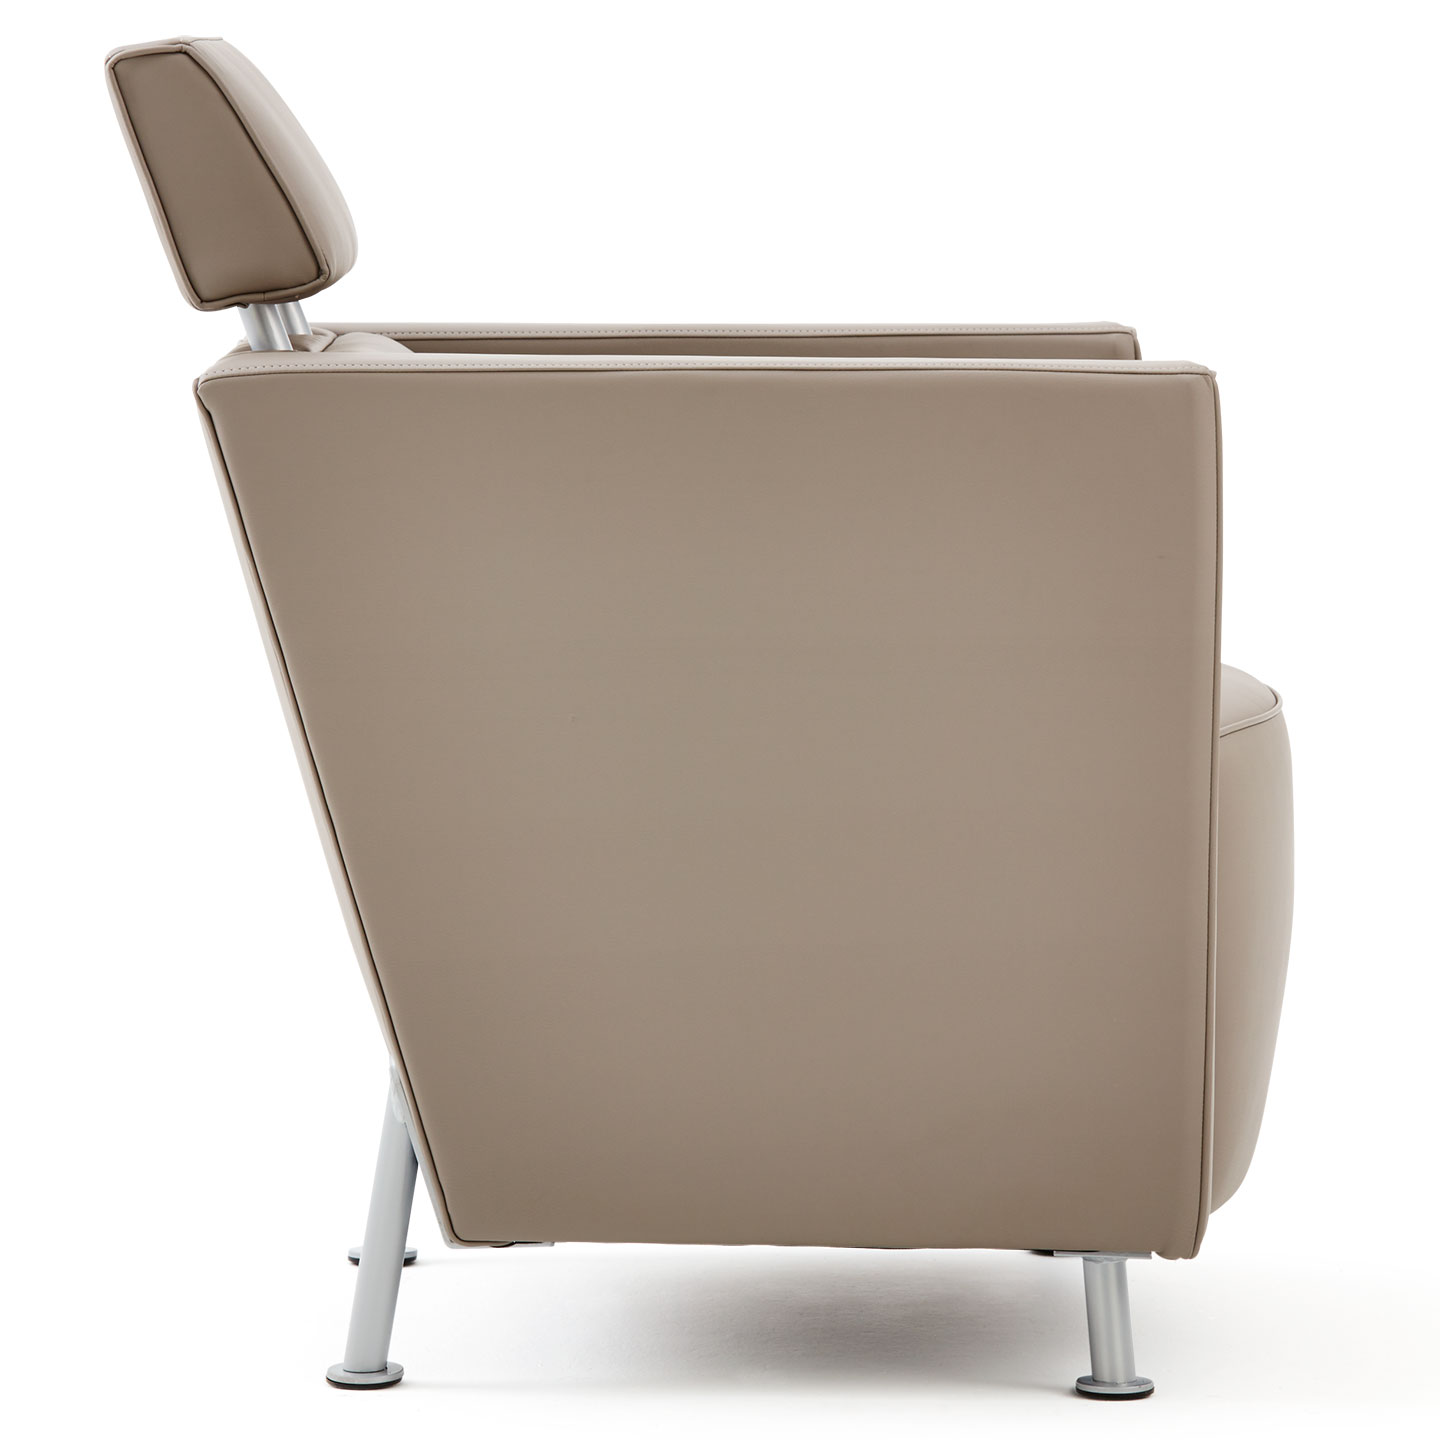 Haworth Hello lounge chair in grey leather upholstery in side view